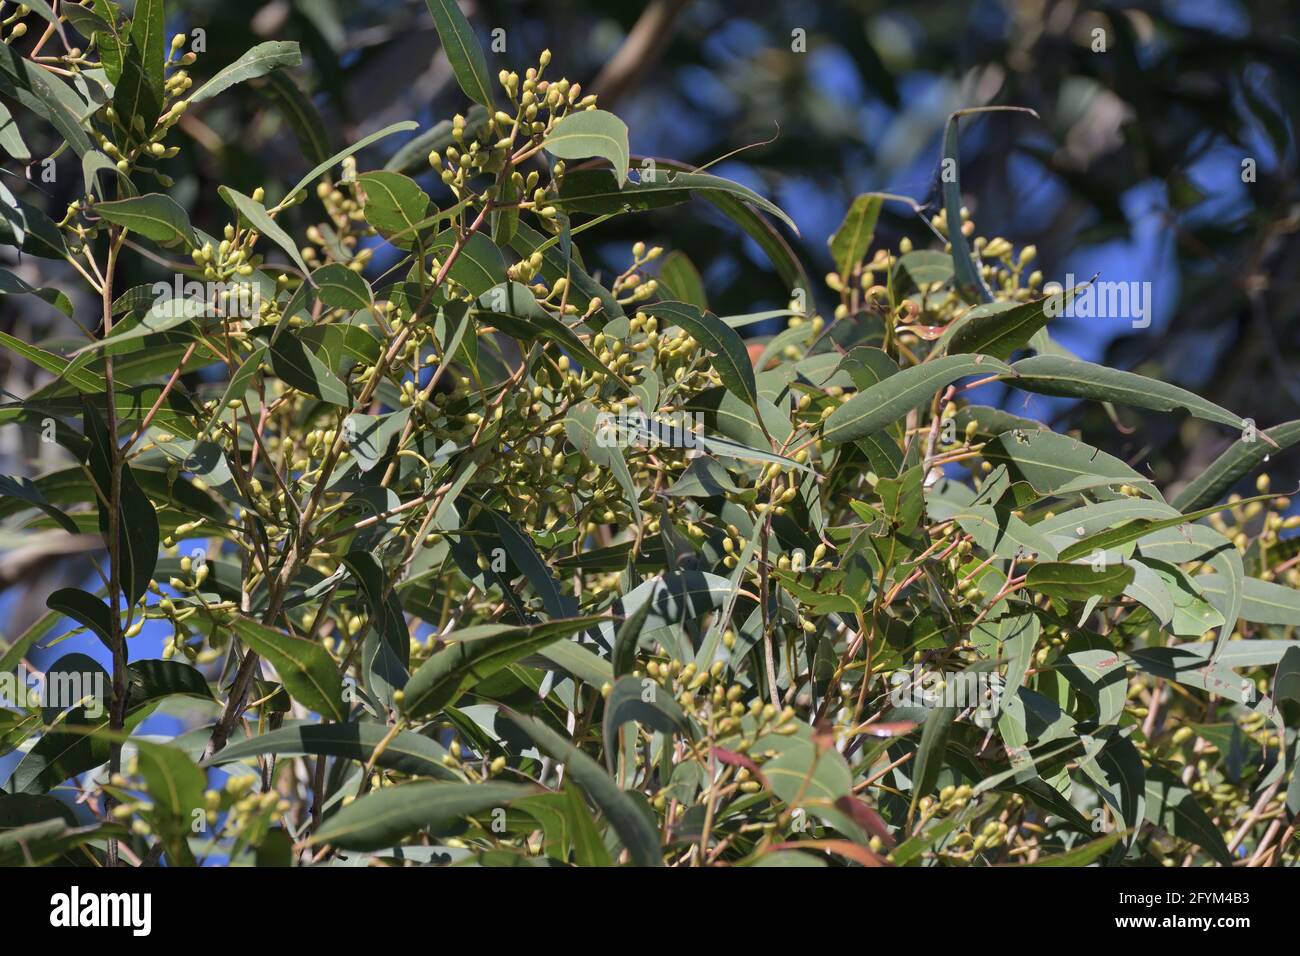 Leaves and flower buds on a Corymbia maculata (Spotted Gum) eucalypt tree in NSW, Australia Stock Photo